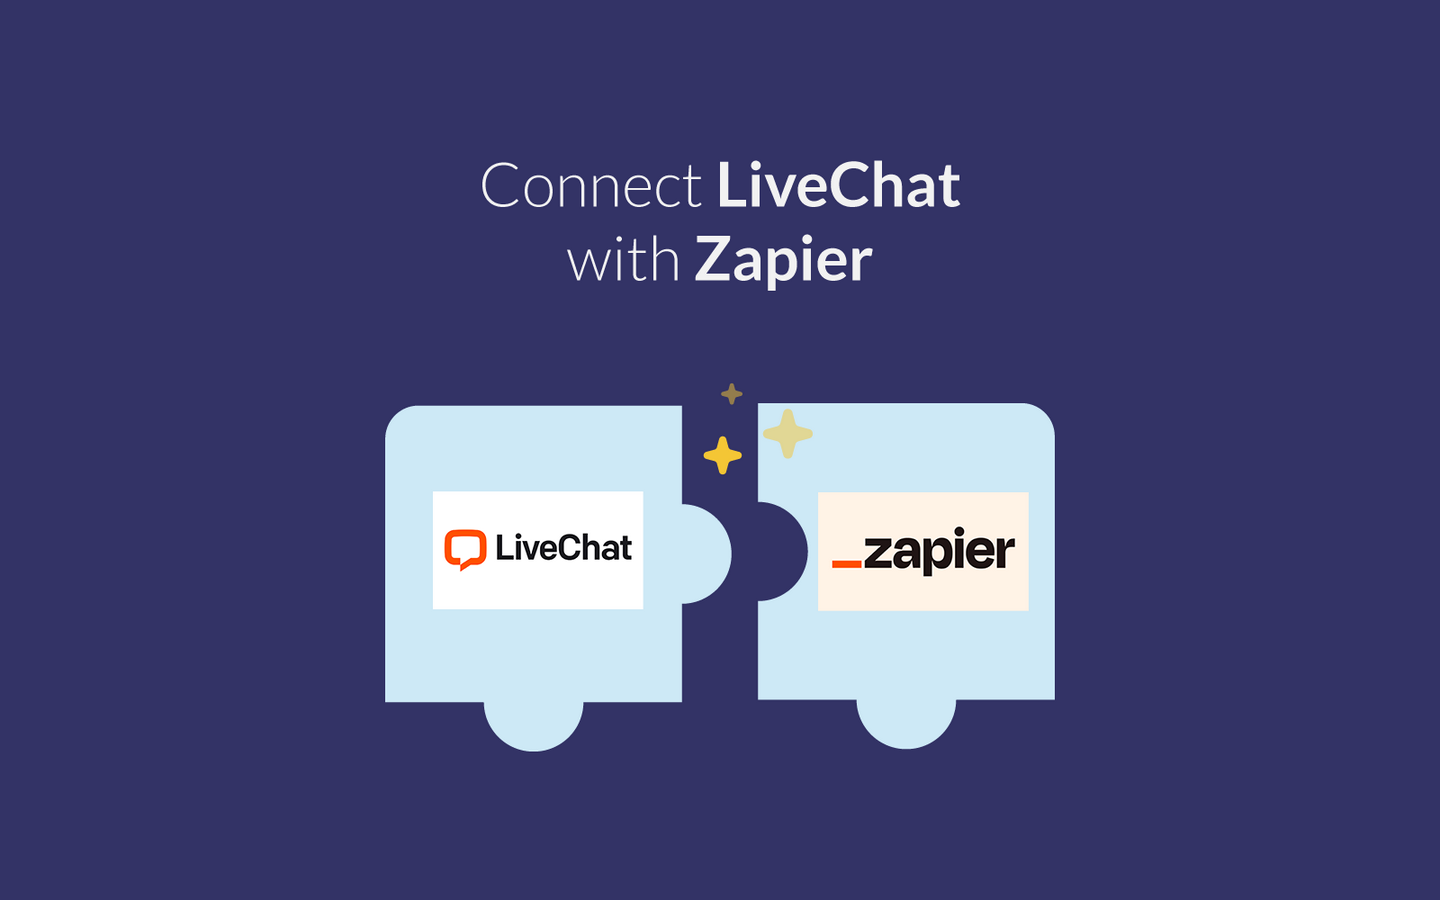 Connect LiveChat with Zapier